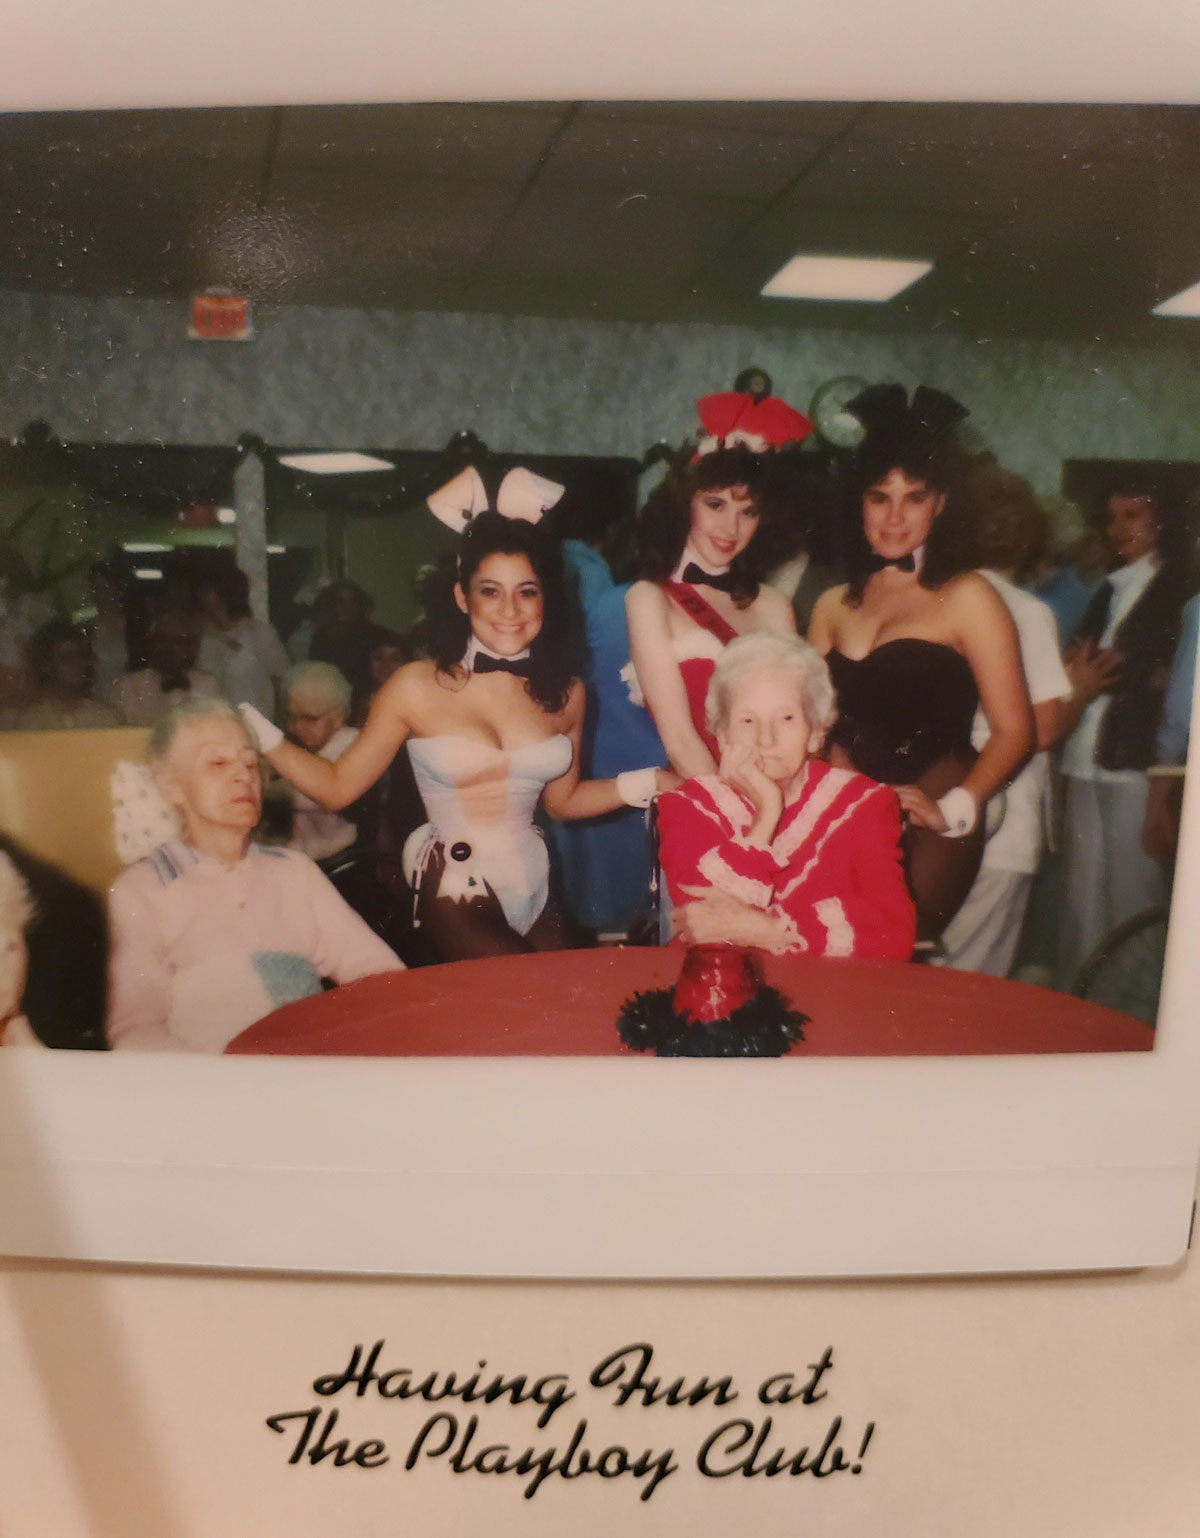 For some reason my Great Great Grandmother's Nursing Home was visited by Playboy Bunnies in the 80's. She (red) is clearly having none of it